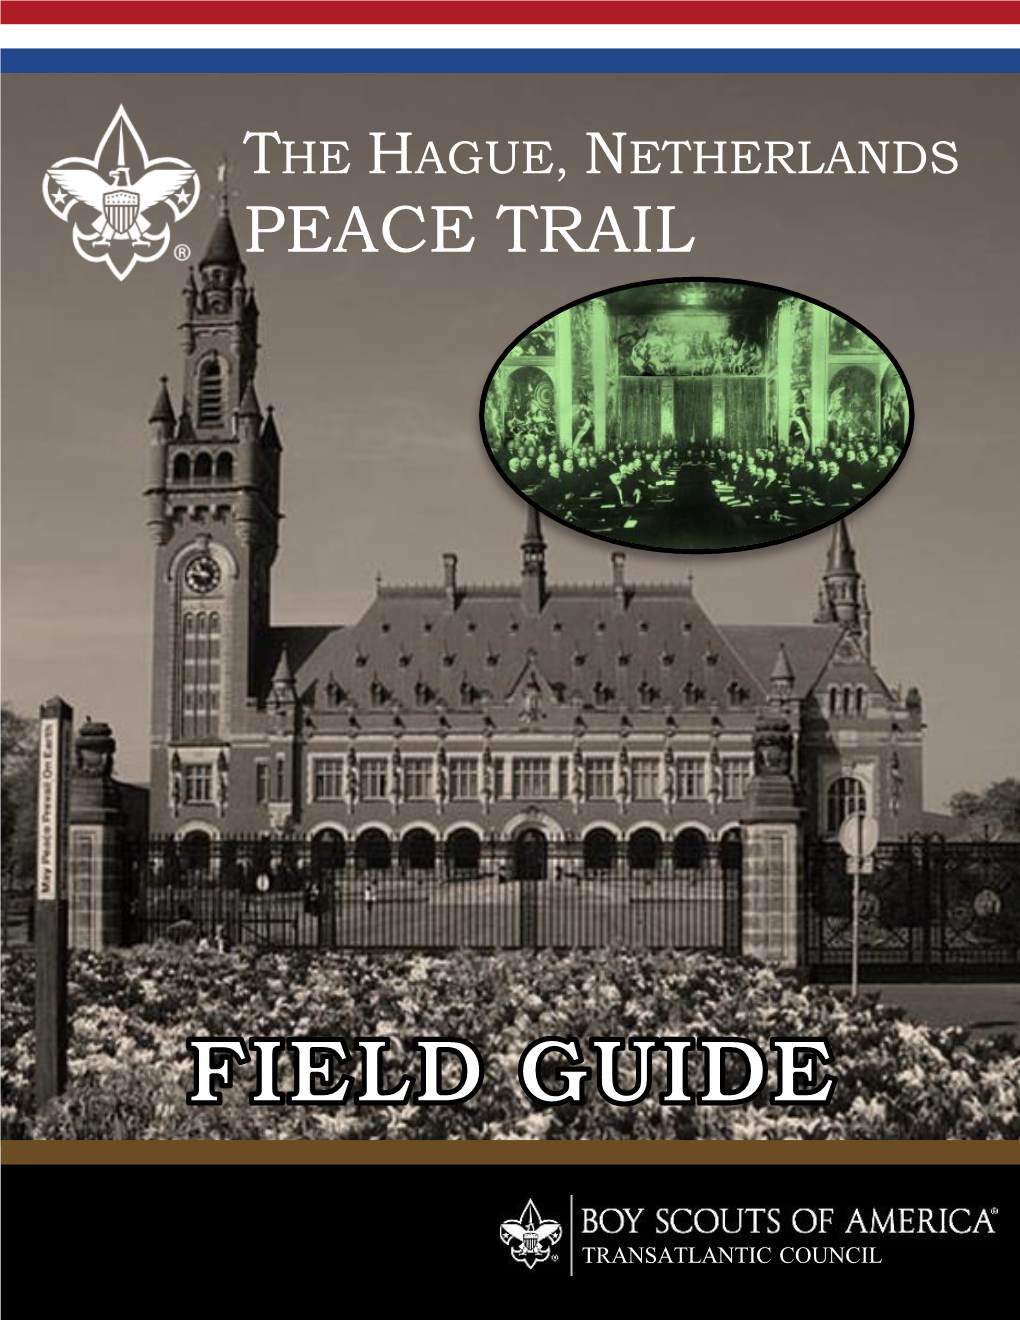 The Hague, Netherlands Peace Trail